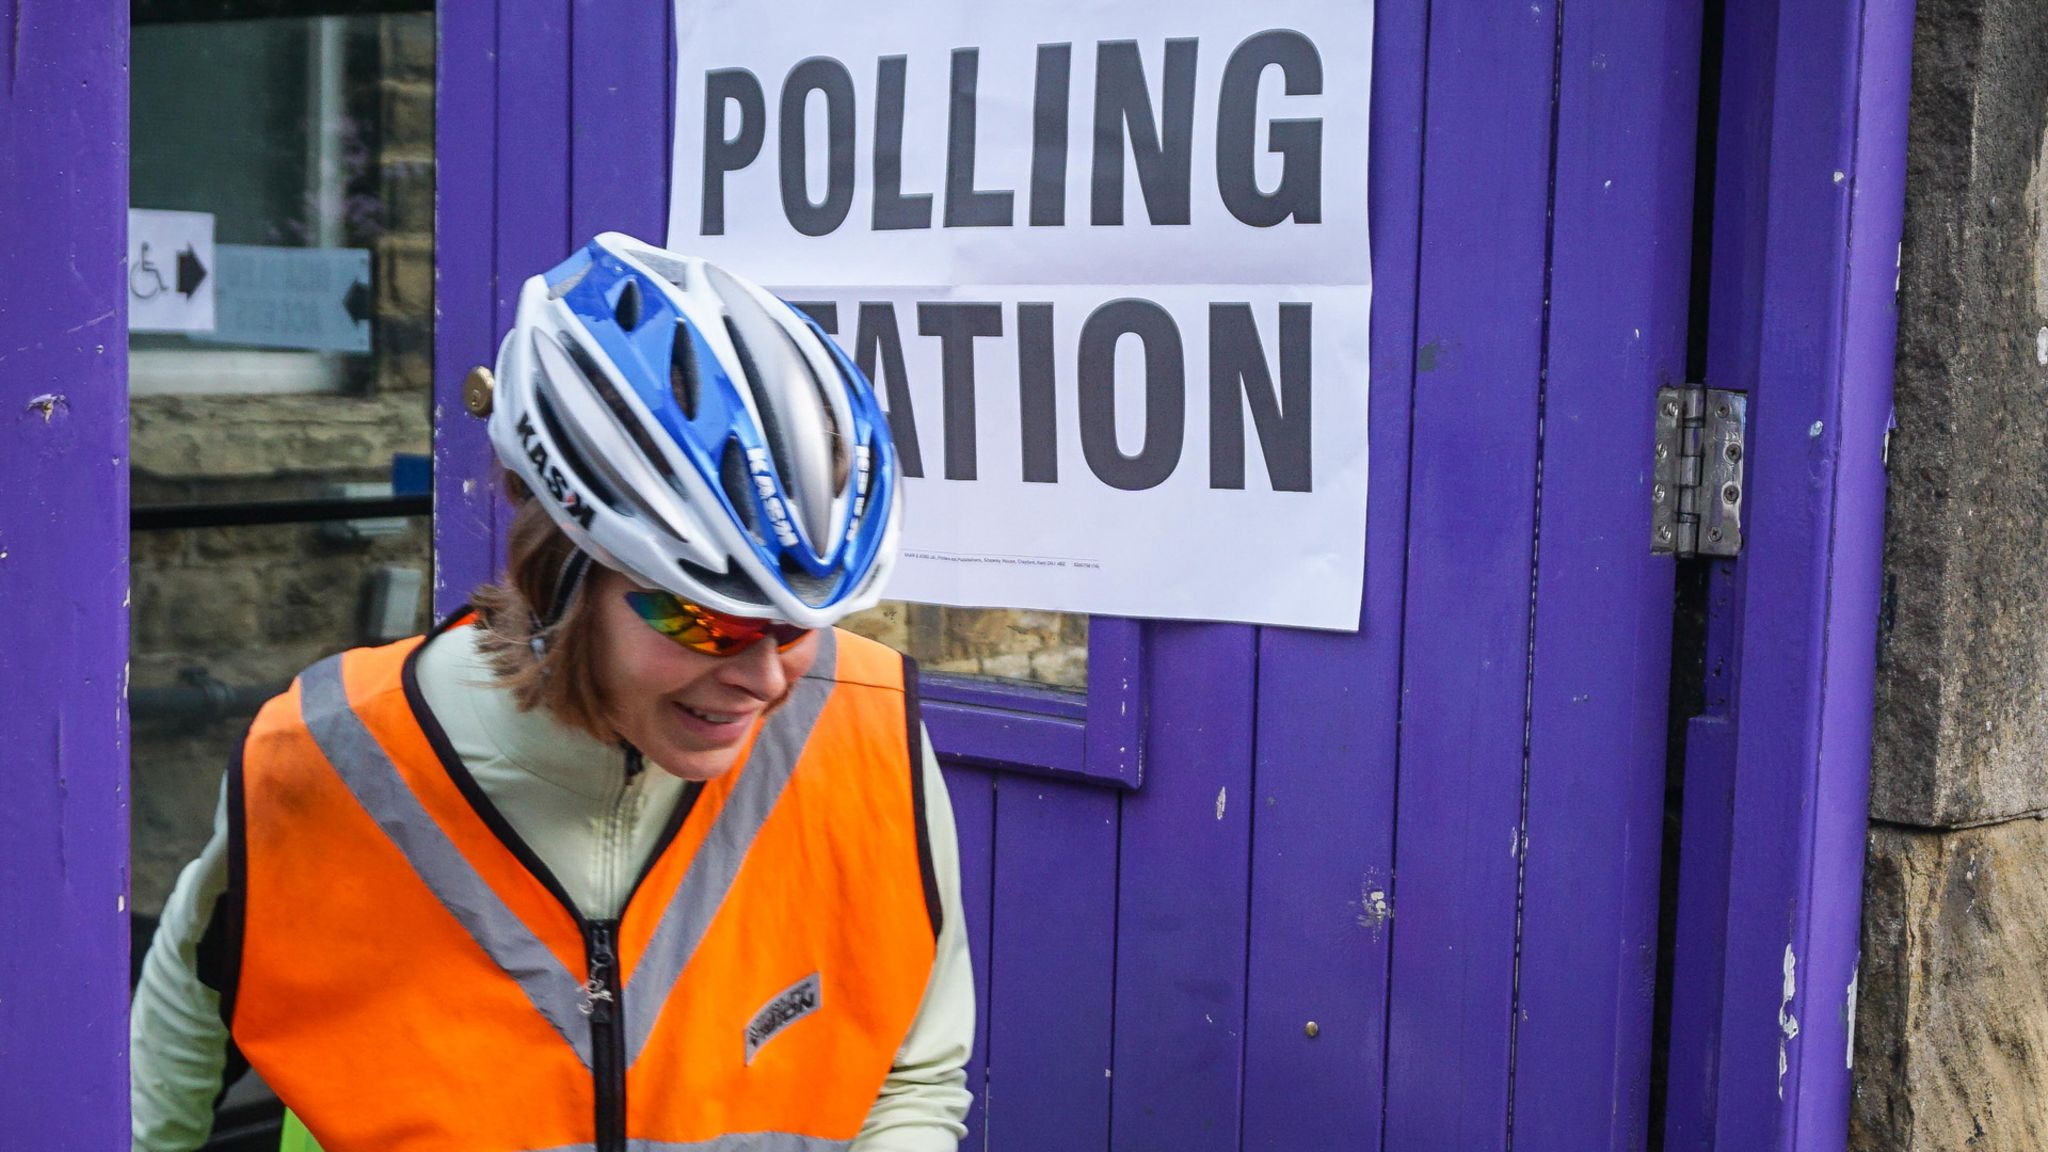 Cyclist at a polling station